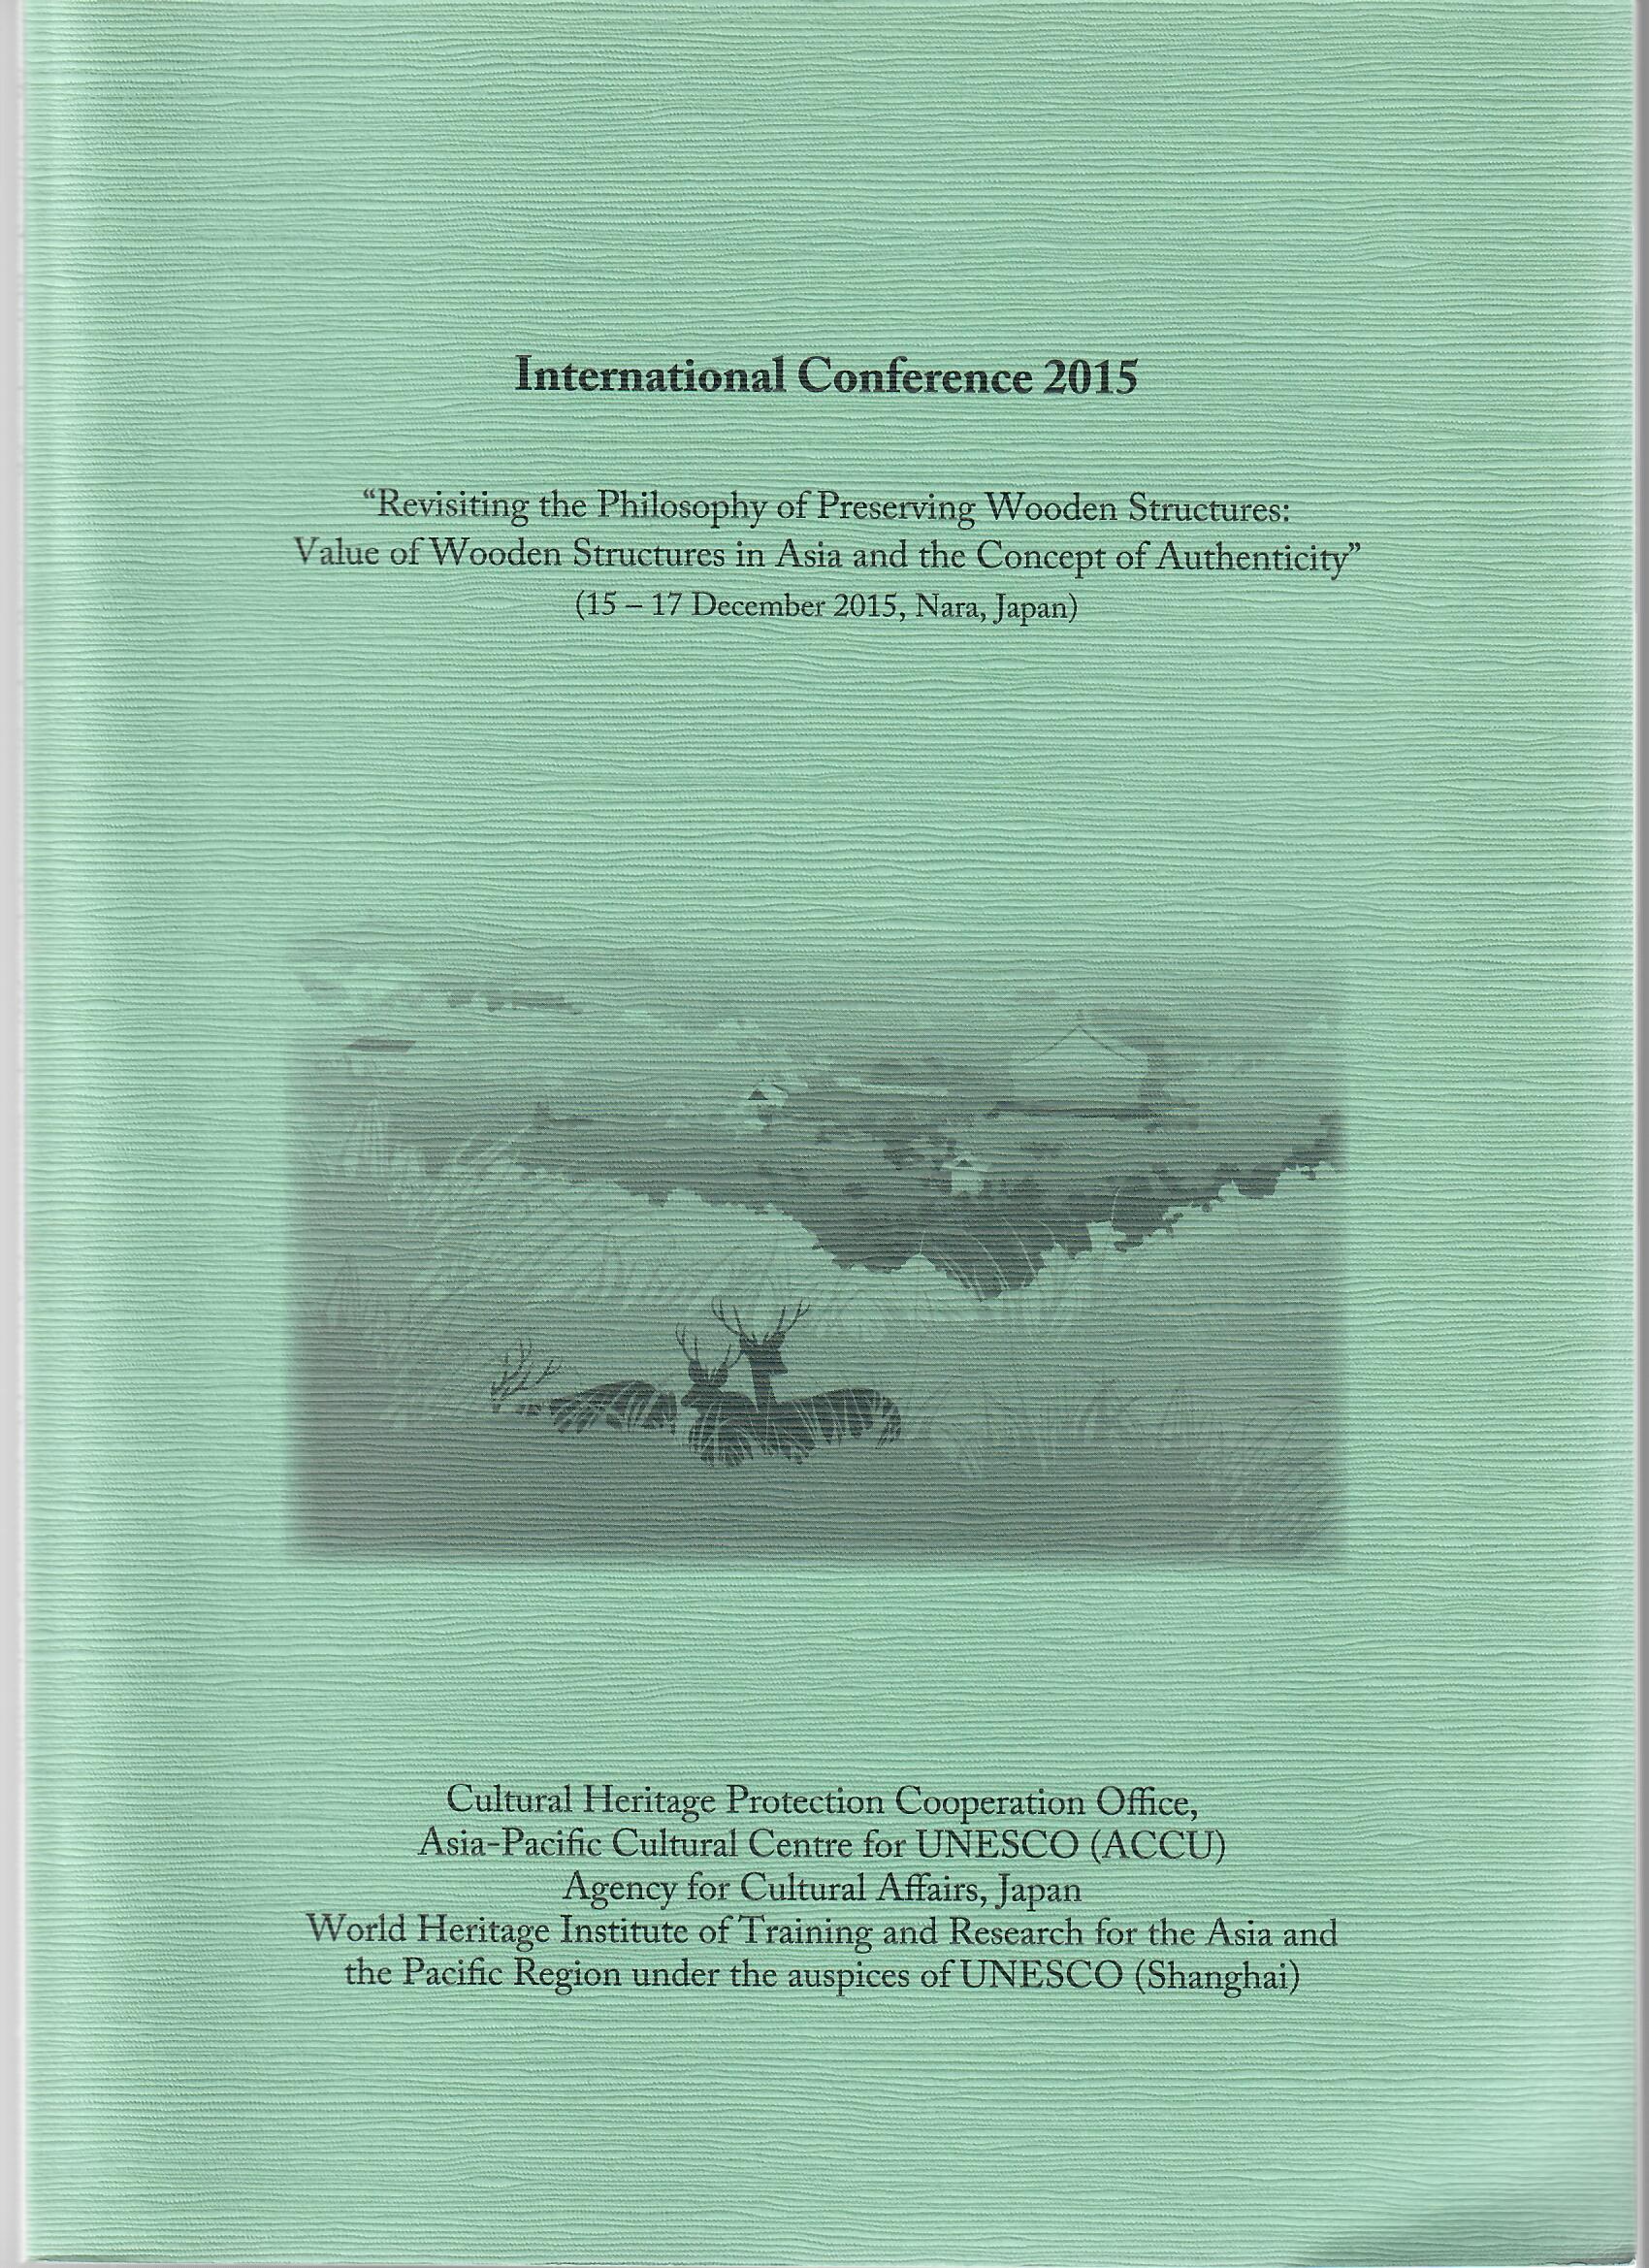 International Conference 2015 “Revisiting the Philosophy of Preserving Wooden Structures: Value of Wooden Structures in Asia and the Concept of Authenticity”